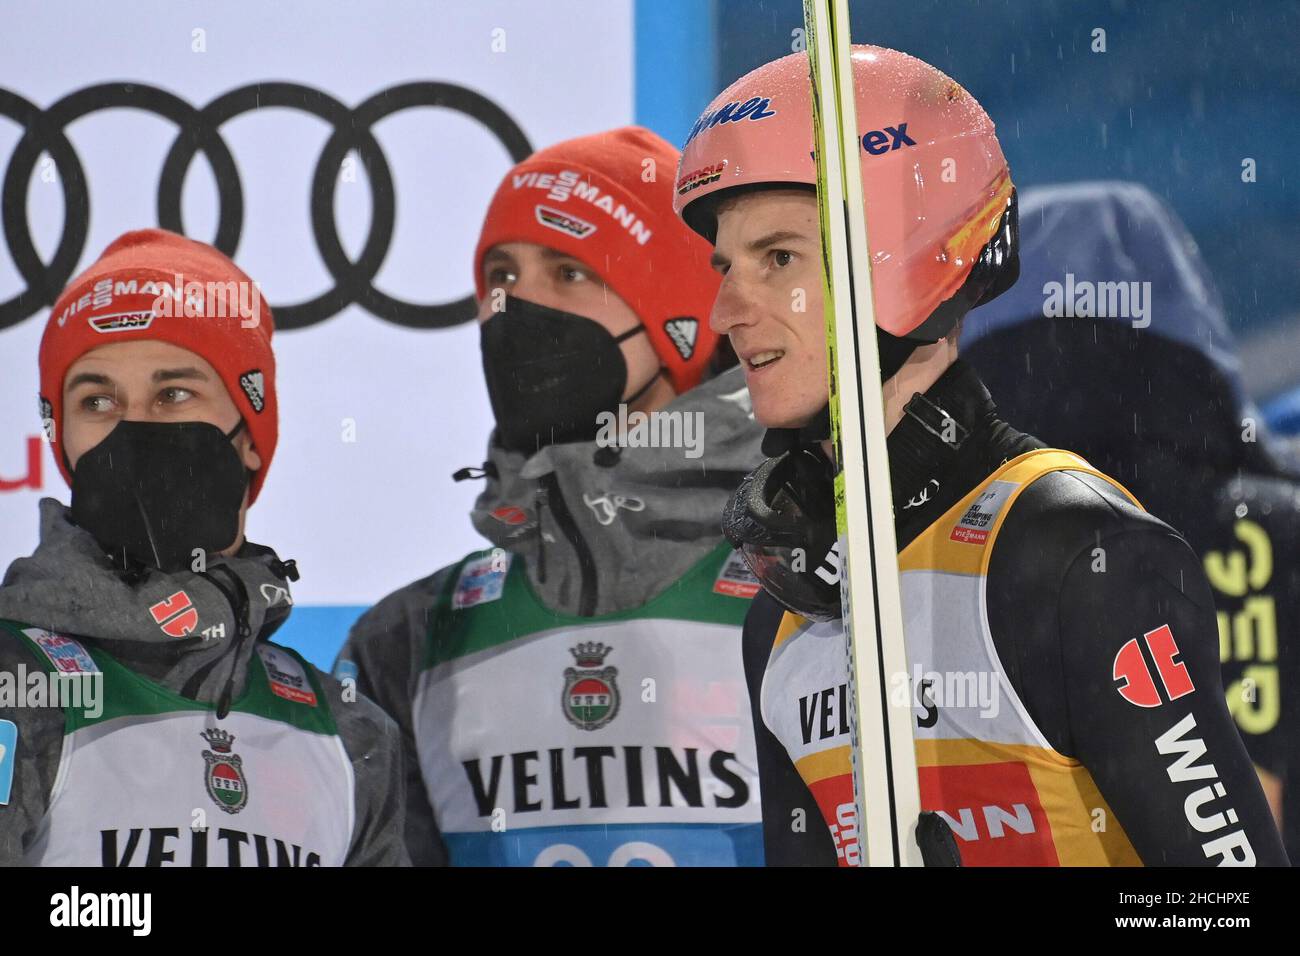 From right: Karl GEIGER (GER), Stephan LEYHE (GER) Markus EISENBICHLER (GER), ski jumping, 70th International Four Hills Tournament 2021/22, opening competition in Oberstdorf, AUDI ARENA on December 29th, 2021. Stock Photo